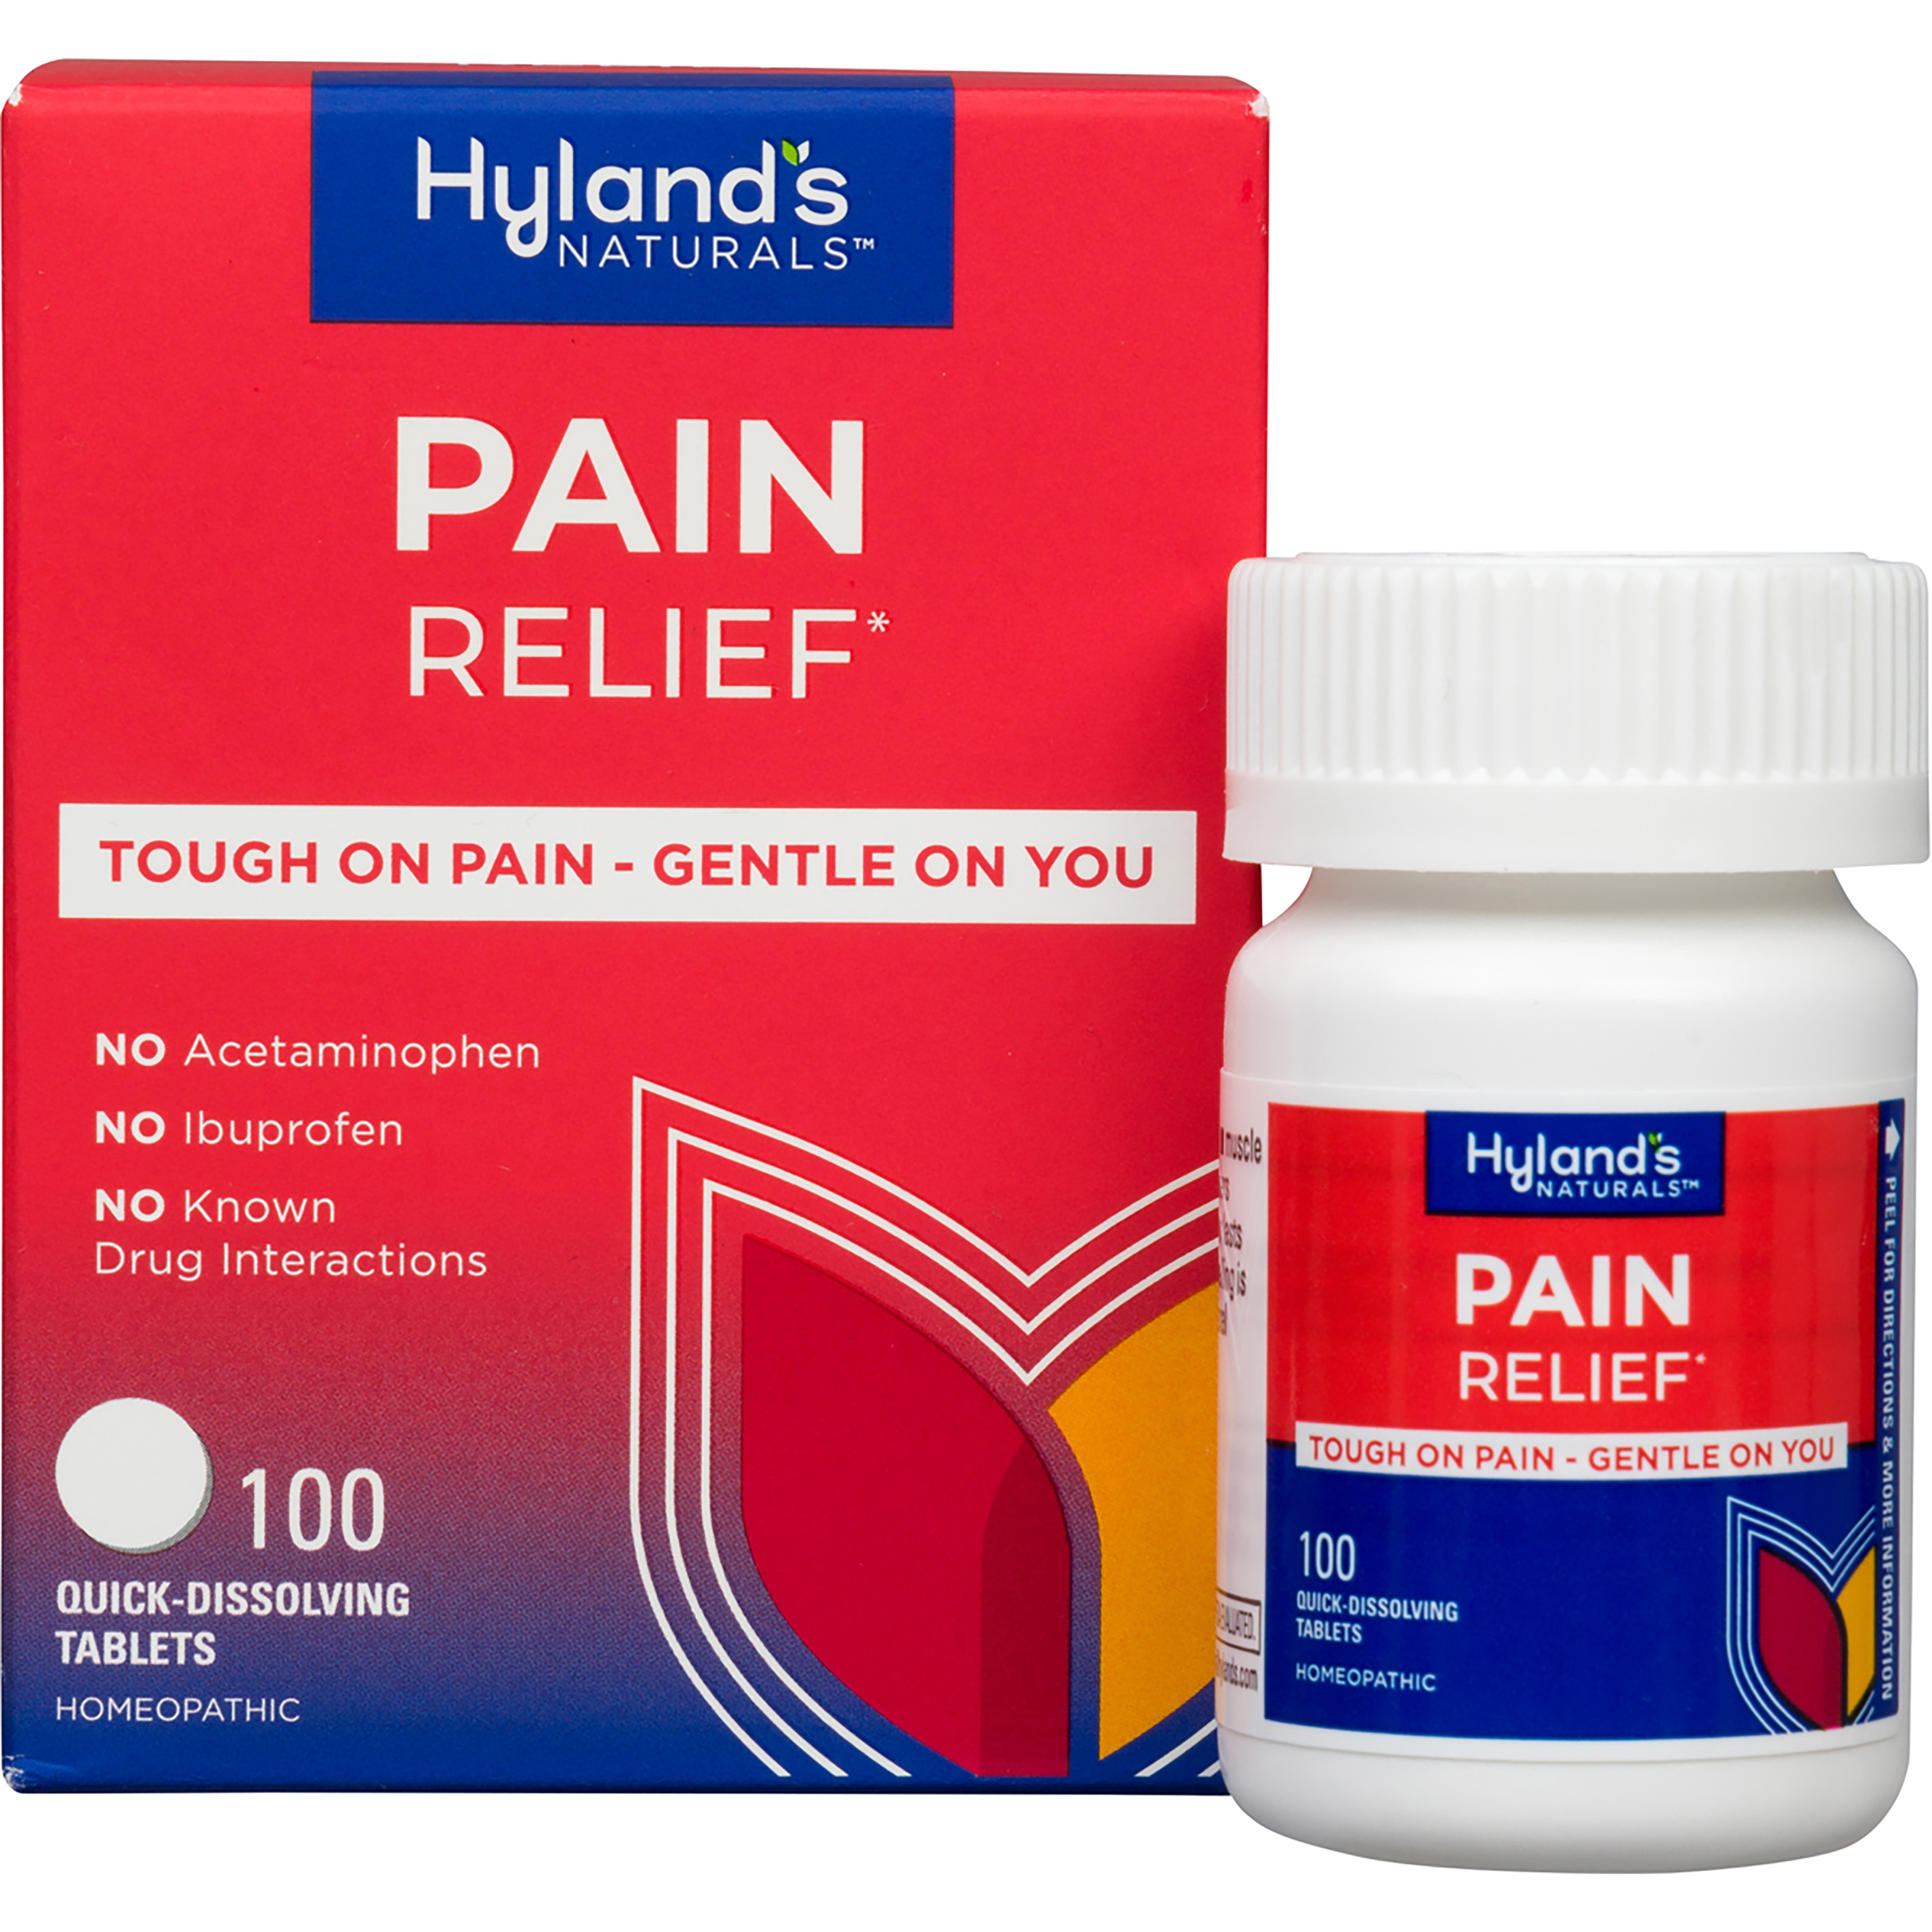 Hyland's Naturals Pain Relief Quick-Dissolving Tablets, 100 Tablets - image 1 of 2